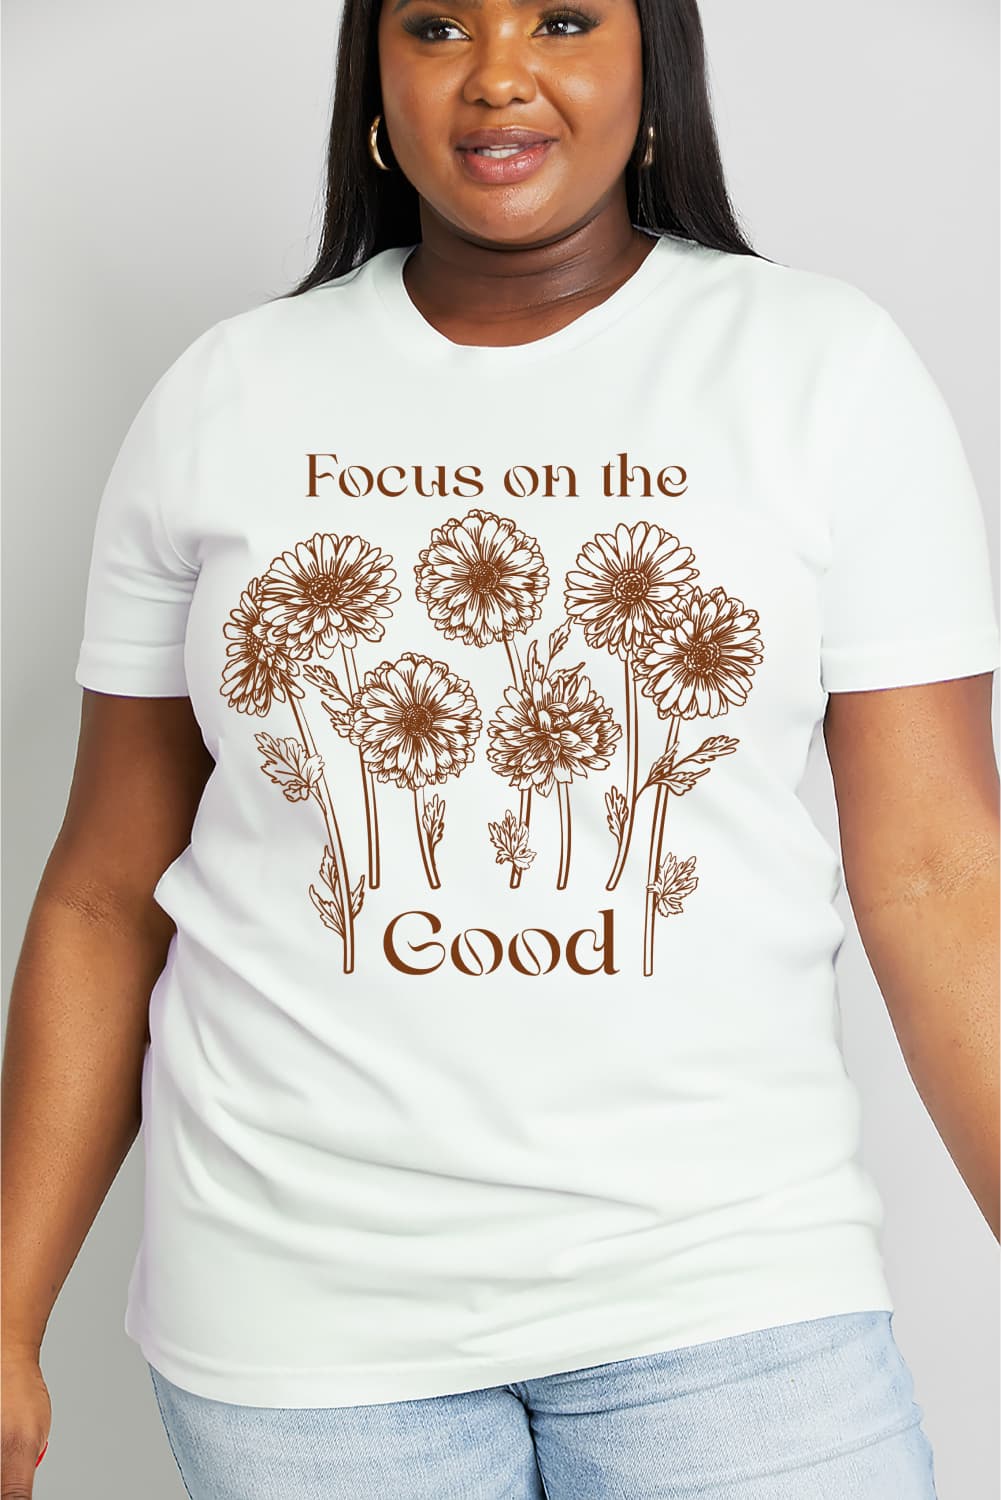 Light Gray Simply Love Full Size FOCUS ON THE GOOD Graphic Cotton Tee Sentient Beauty Fashions Apparel & Accessories